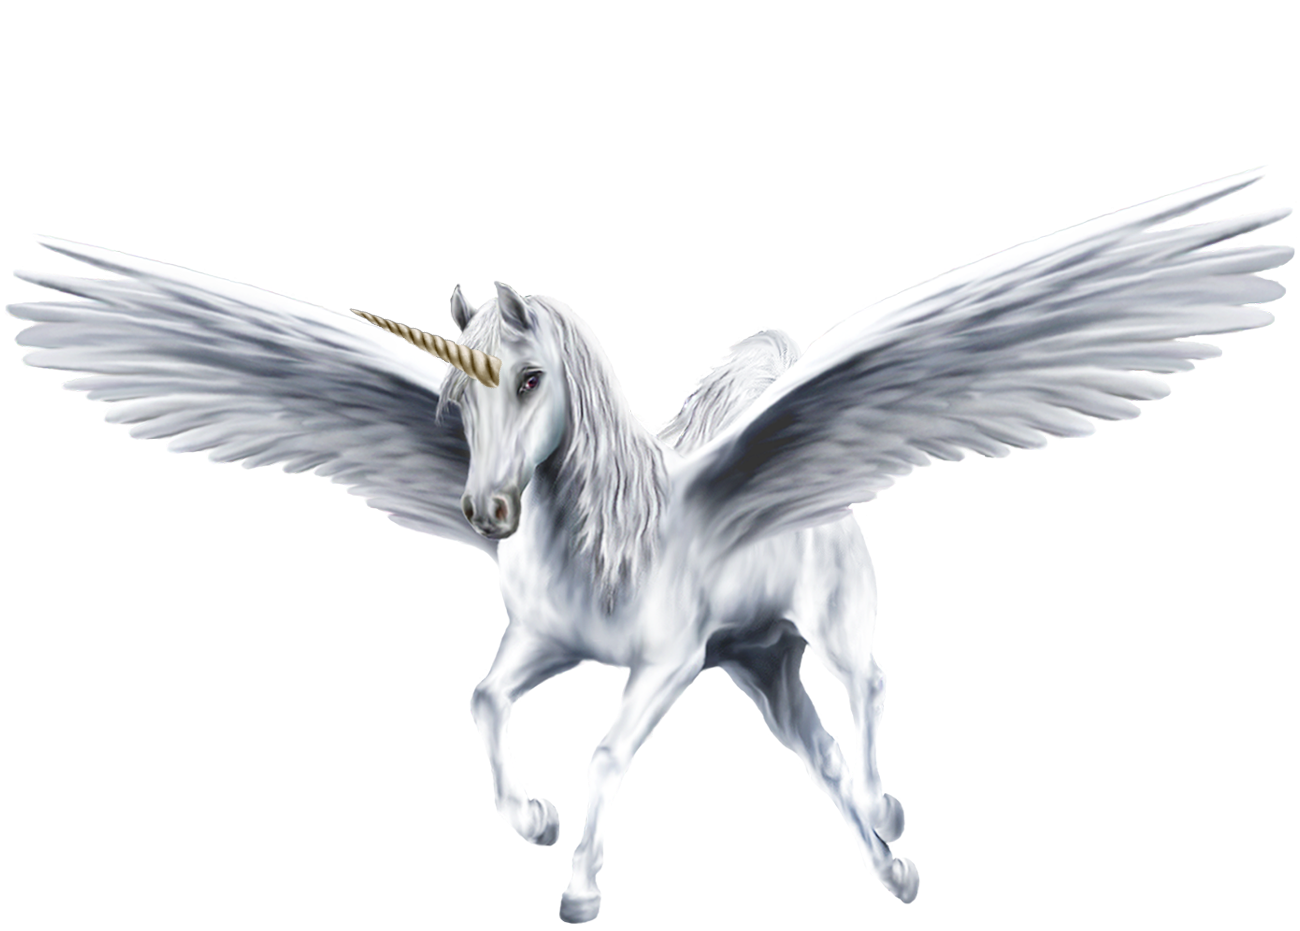 Black Unicorns With Wings Wallpapers